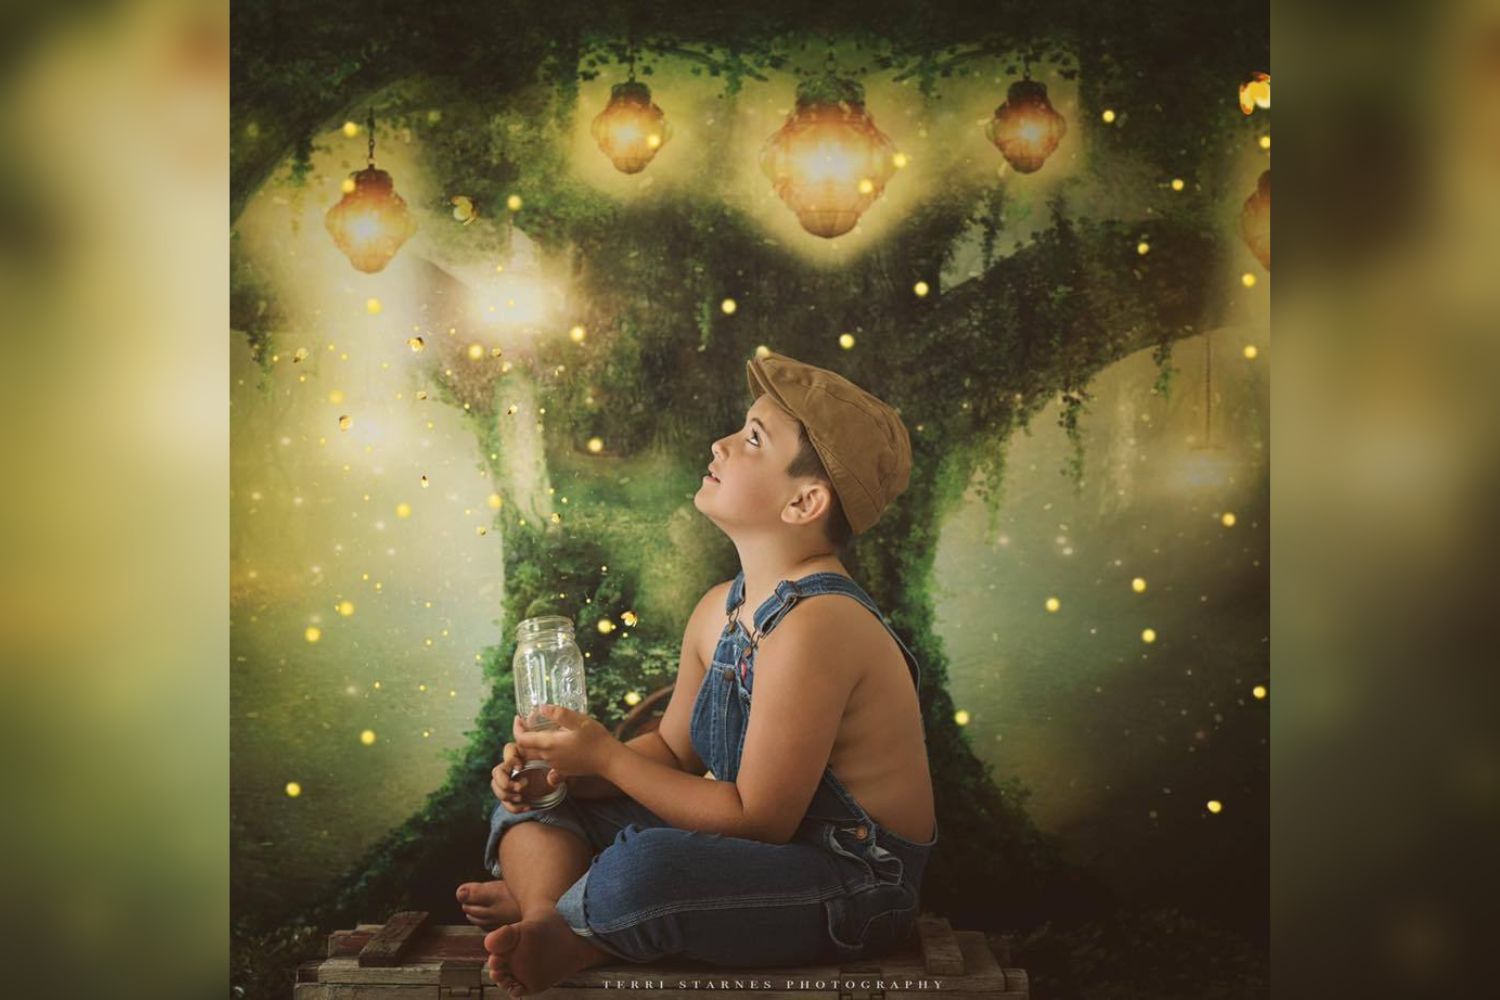 a boy exploring the fantasy world by holding a lamp